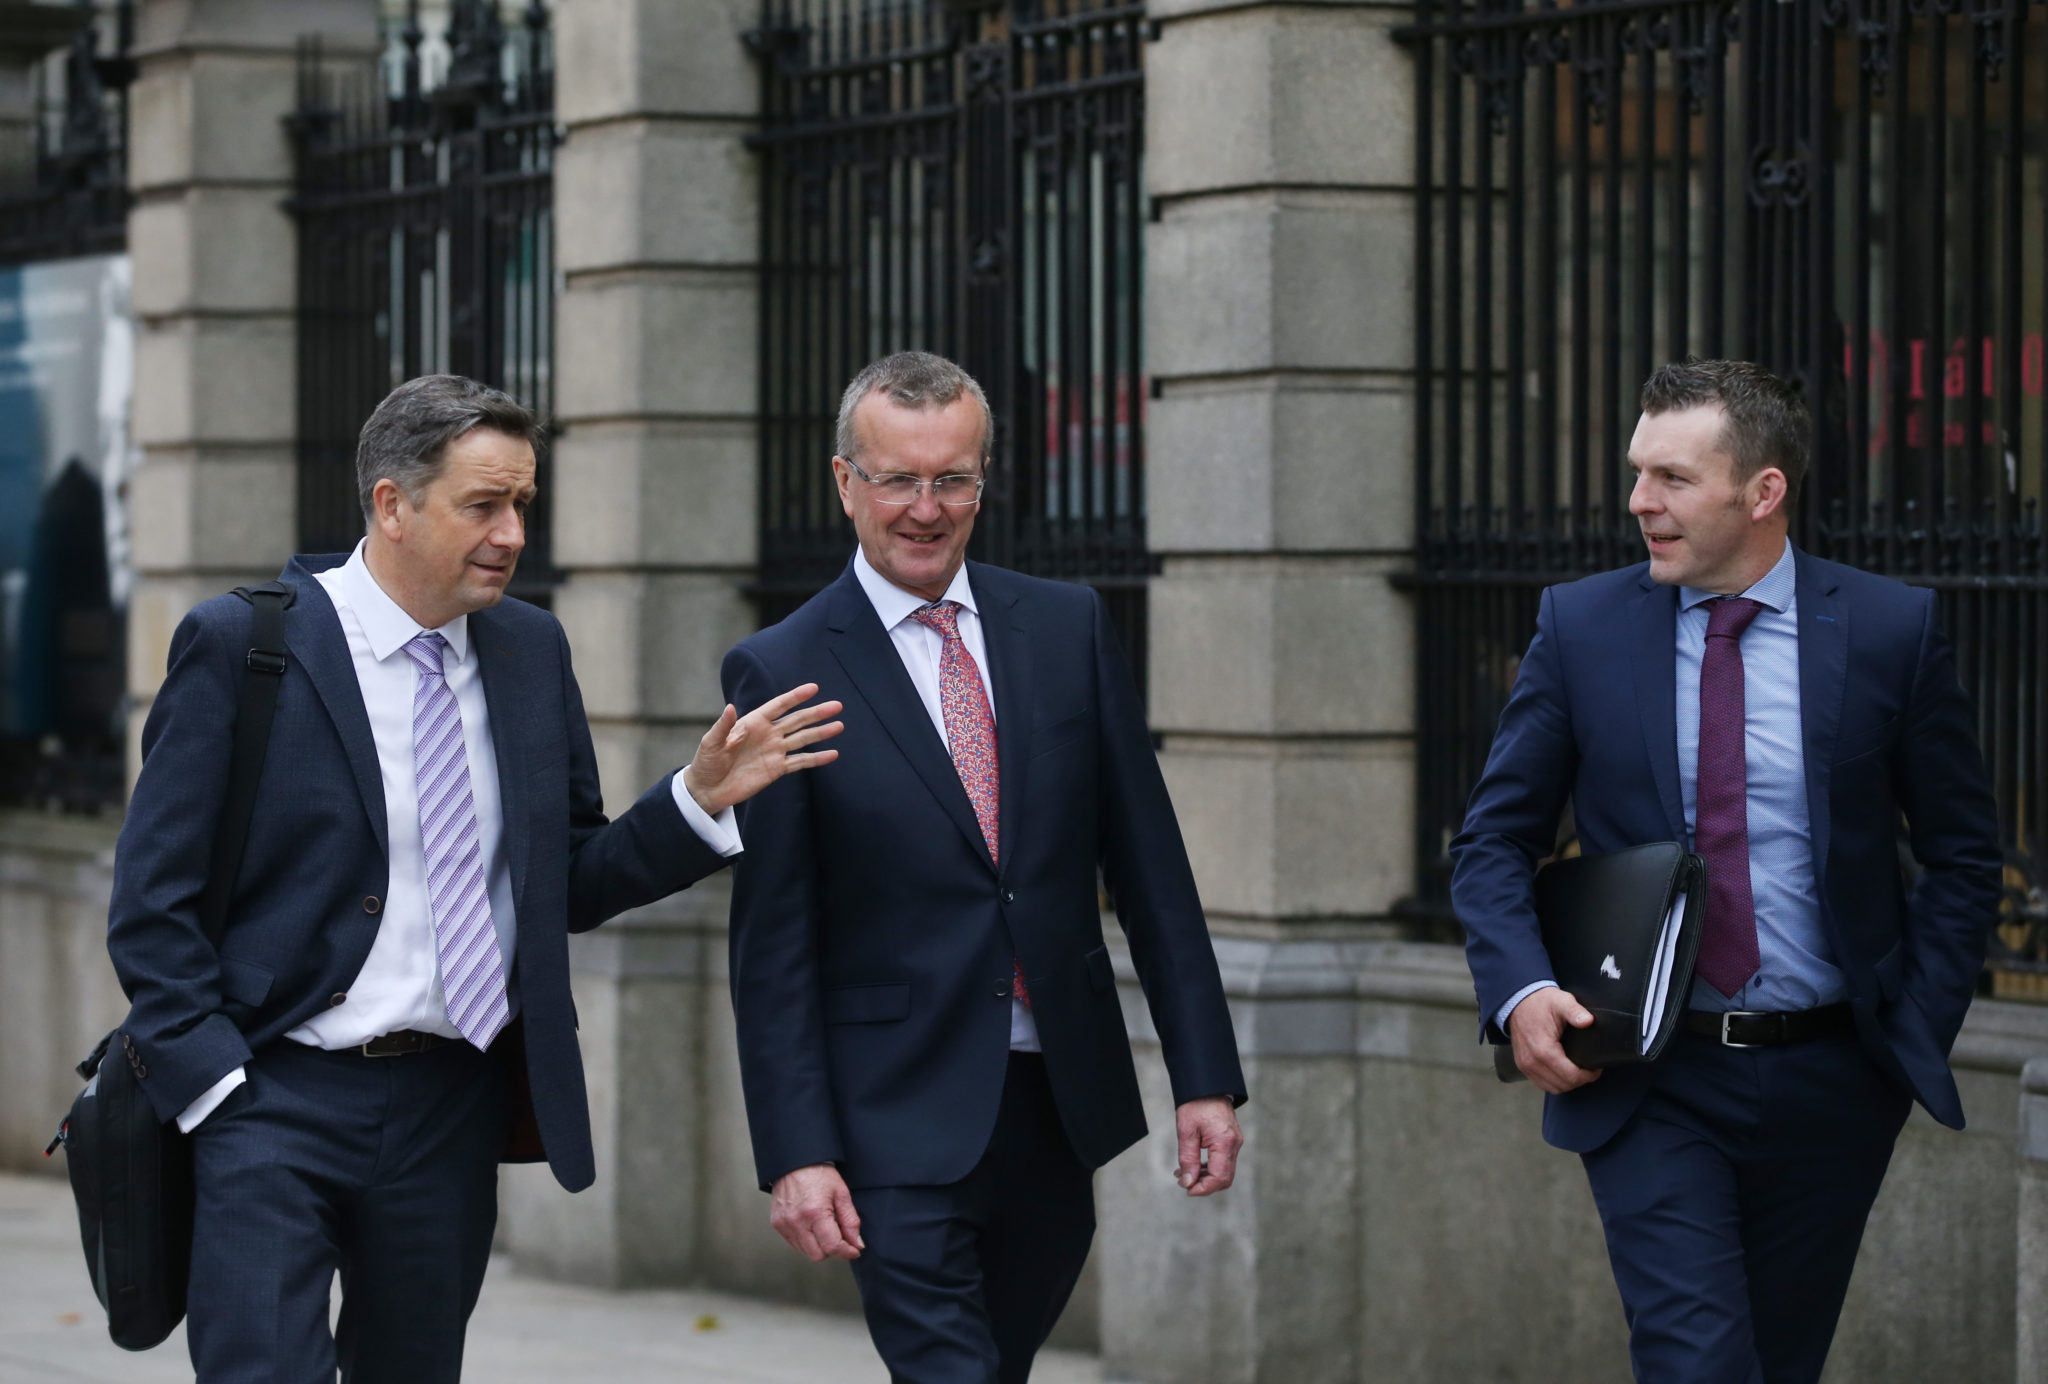 Pictured are (l to r) IFA Director General Damian McDonald, IFA President Tim Cullinan and IFA Deputy President Brian Rushe on their way into Leinster House to meet then-Minister for Agriculture Dara Calleary